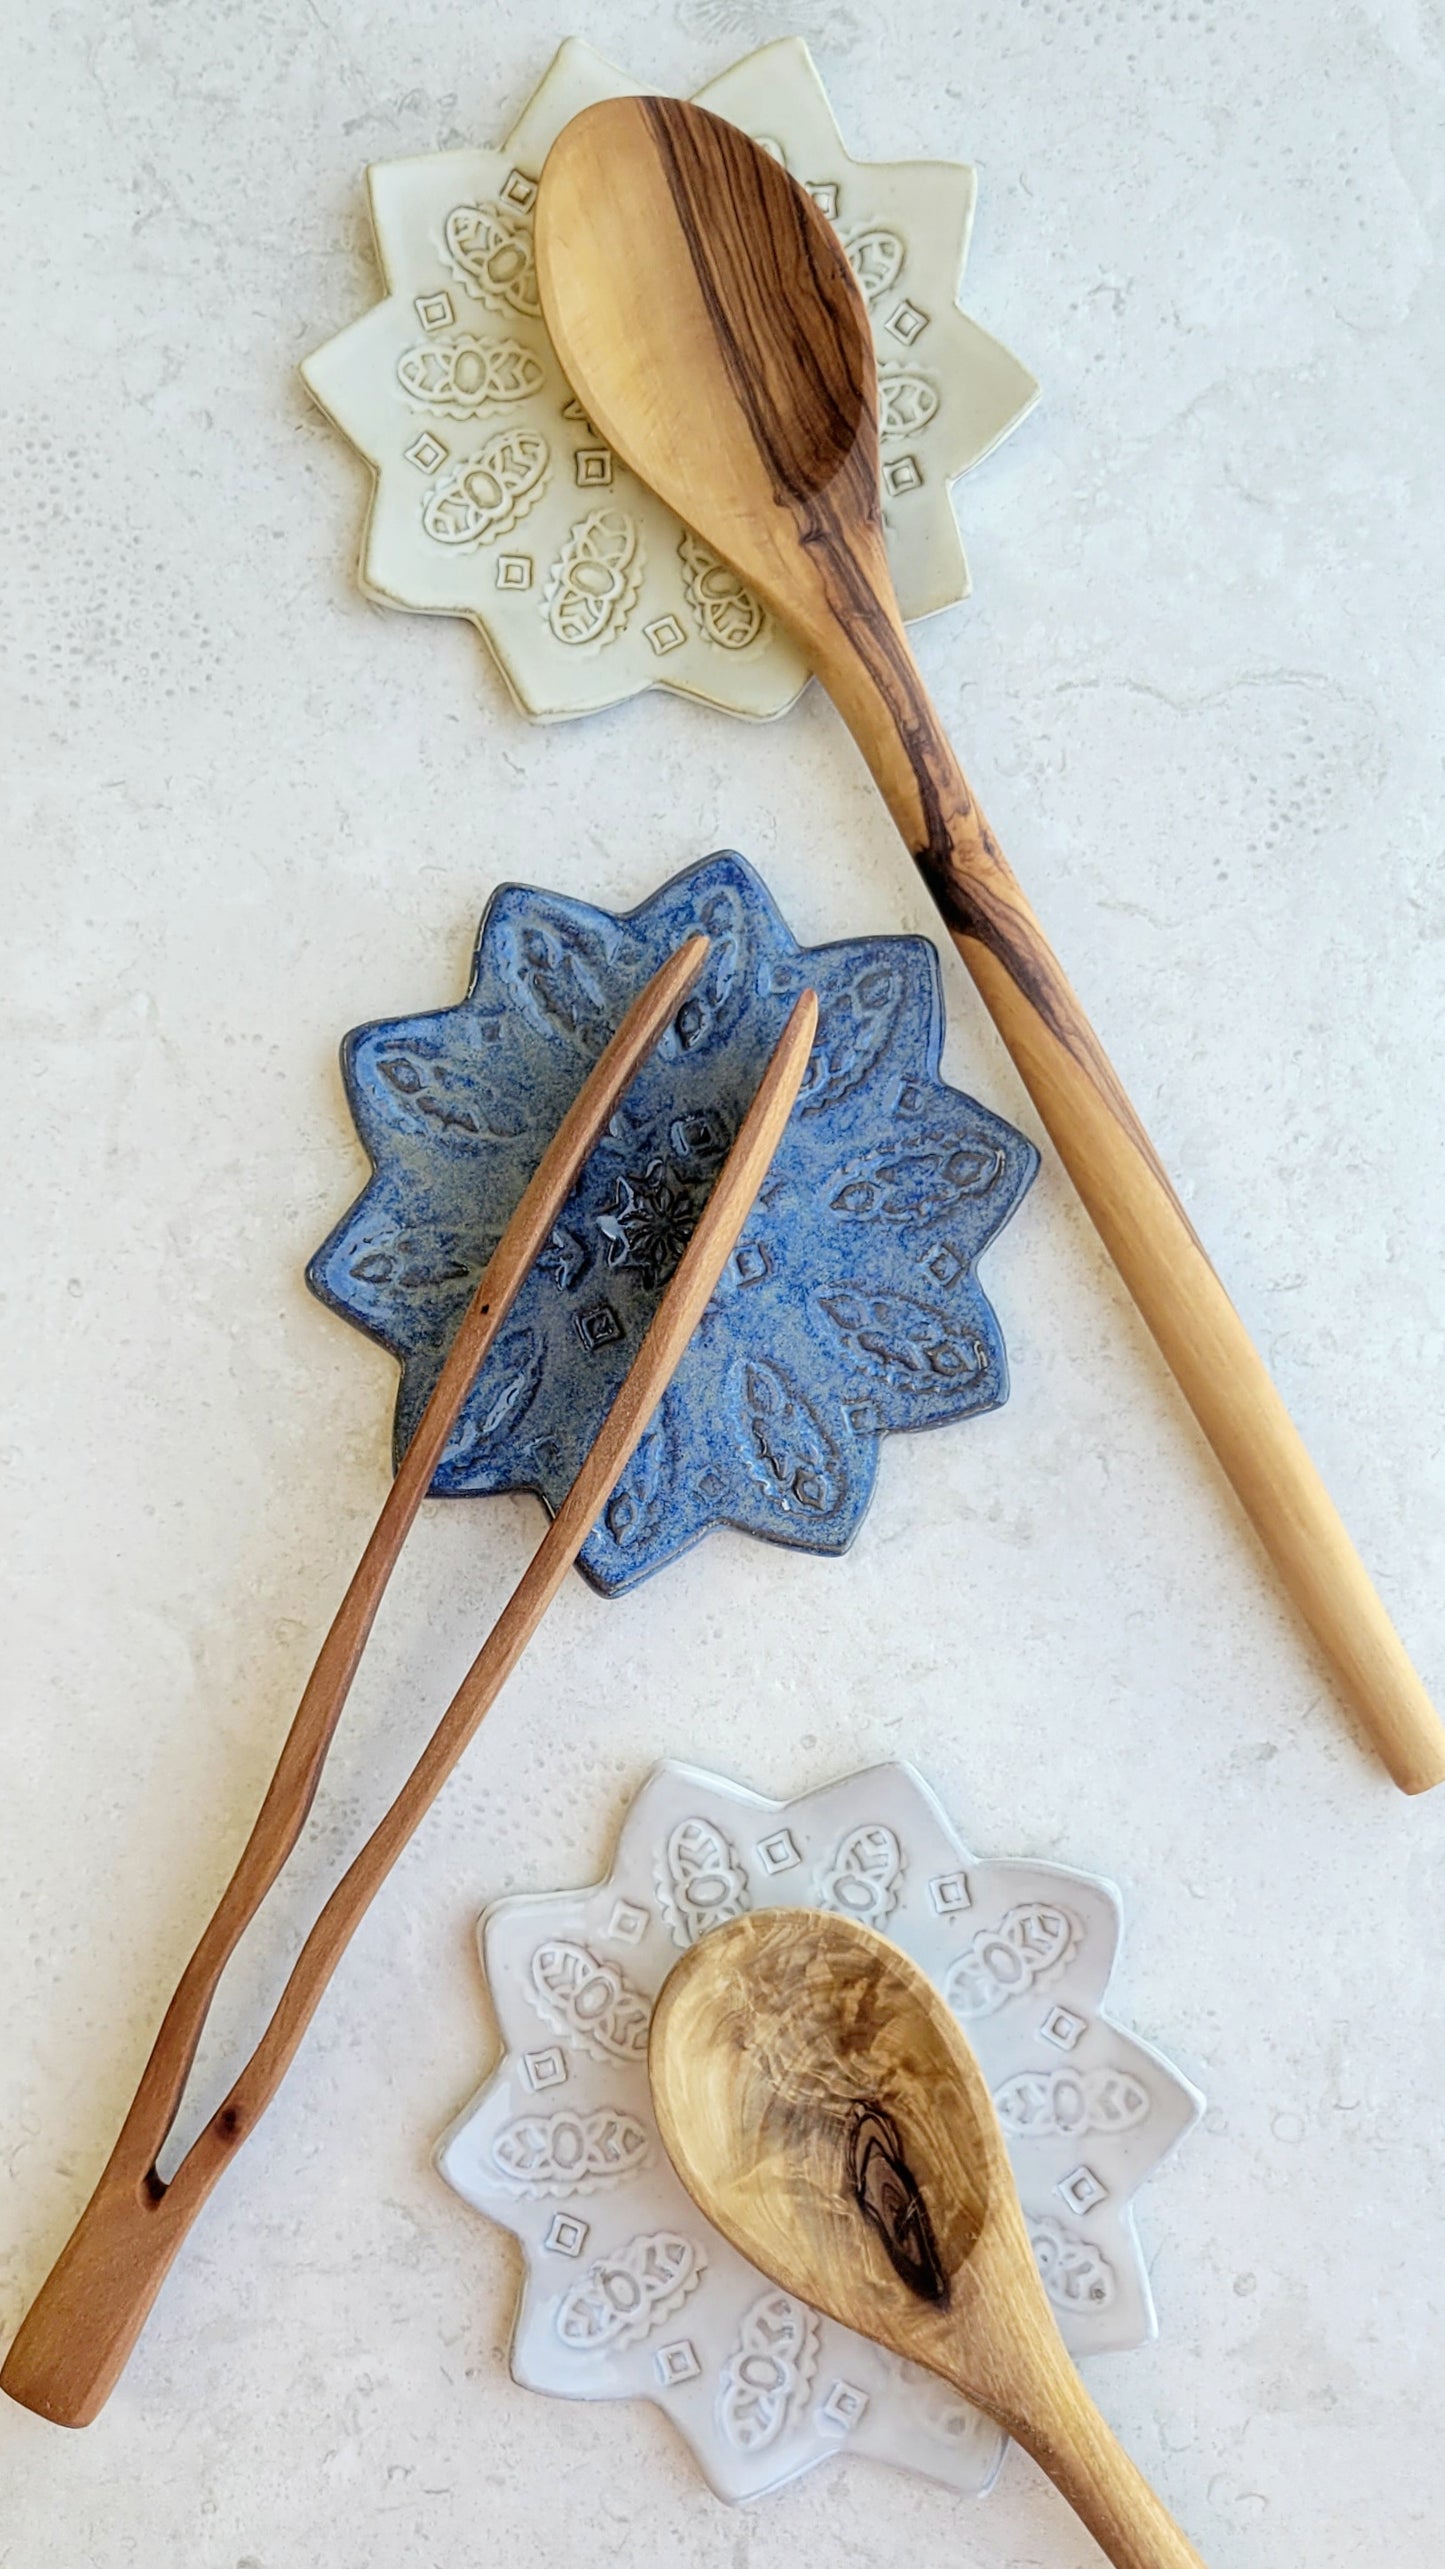 Flower Shaped Spoon Rest for Kitchen Counter in Farmhouse Blue